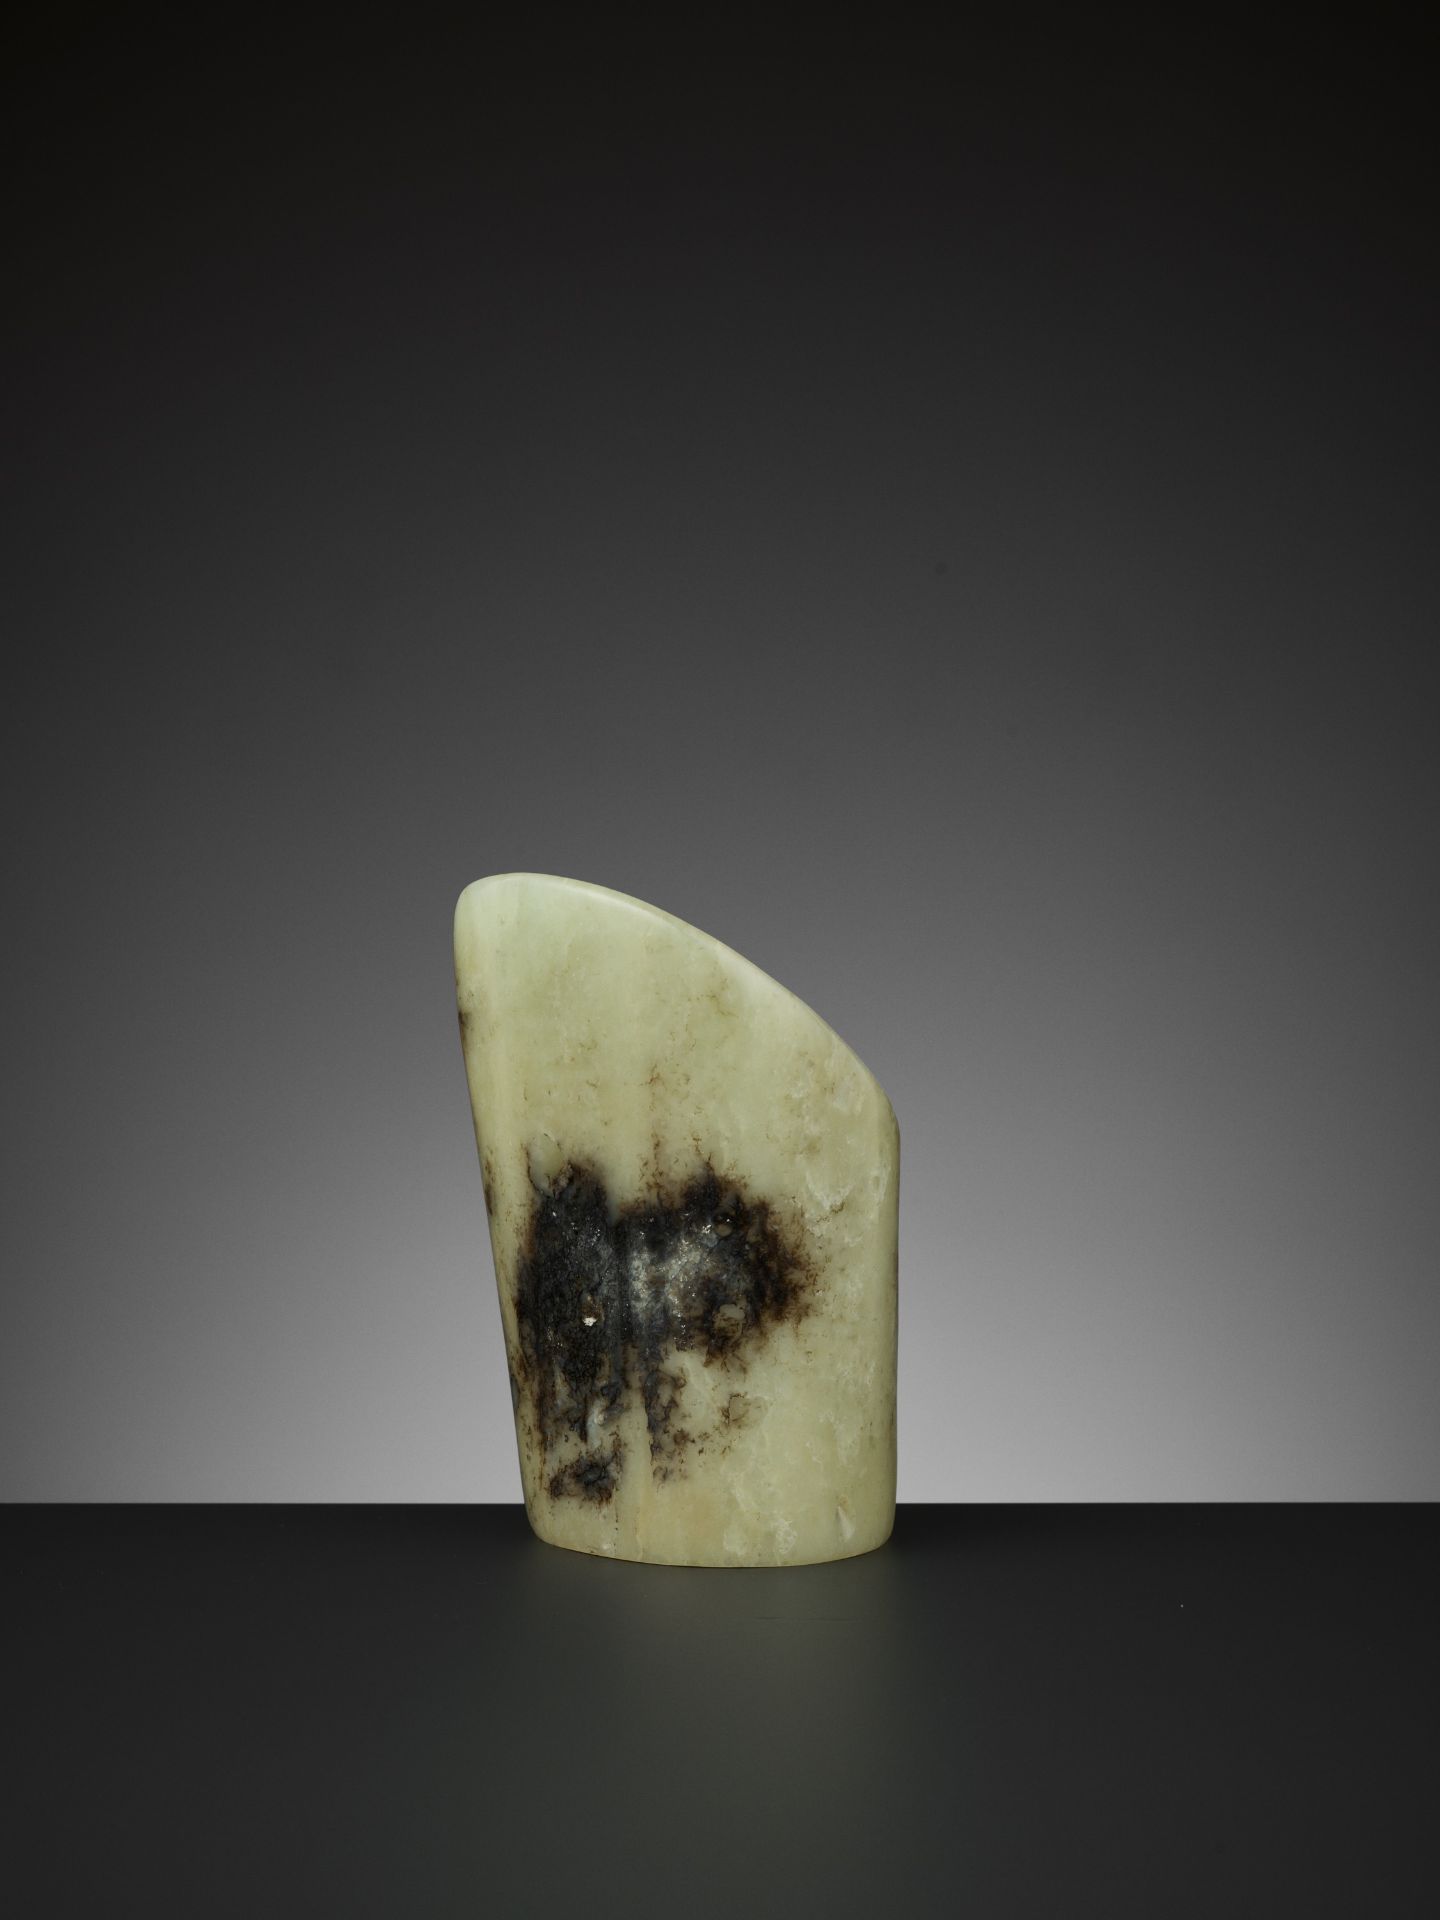 A PALE YELLOW AND RUSSET JADE HOOF-SHAPED ORNAMENT, HONGSHAN - Image 7 of 13